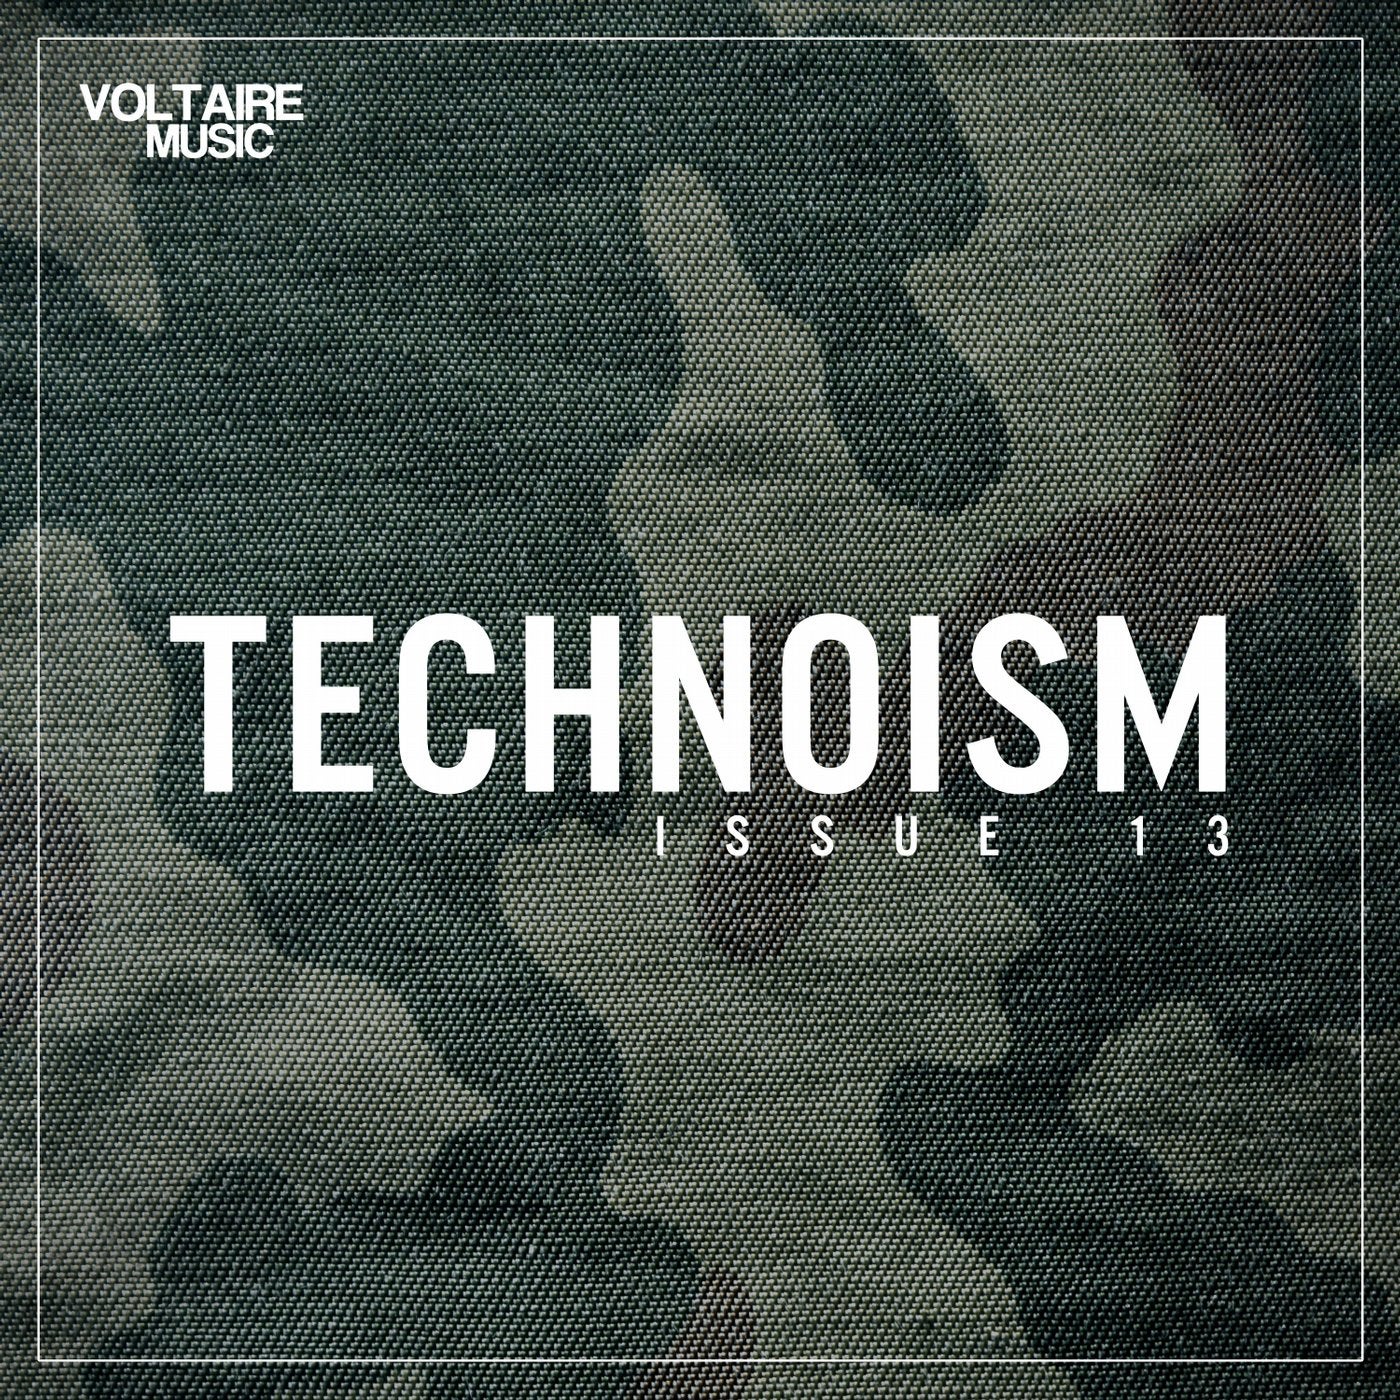 Technoism Issue 13